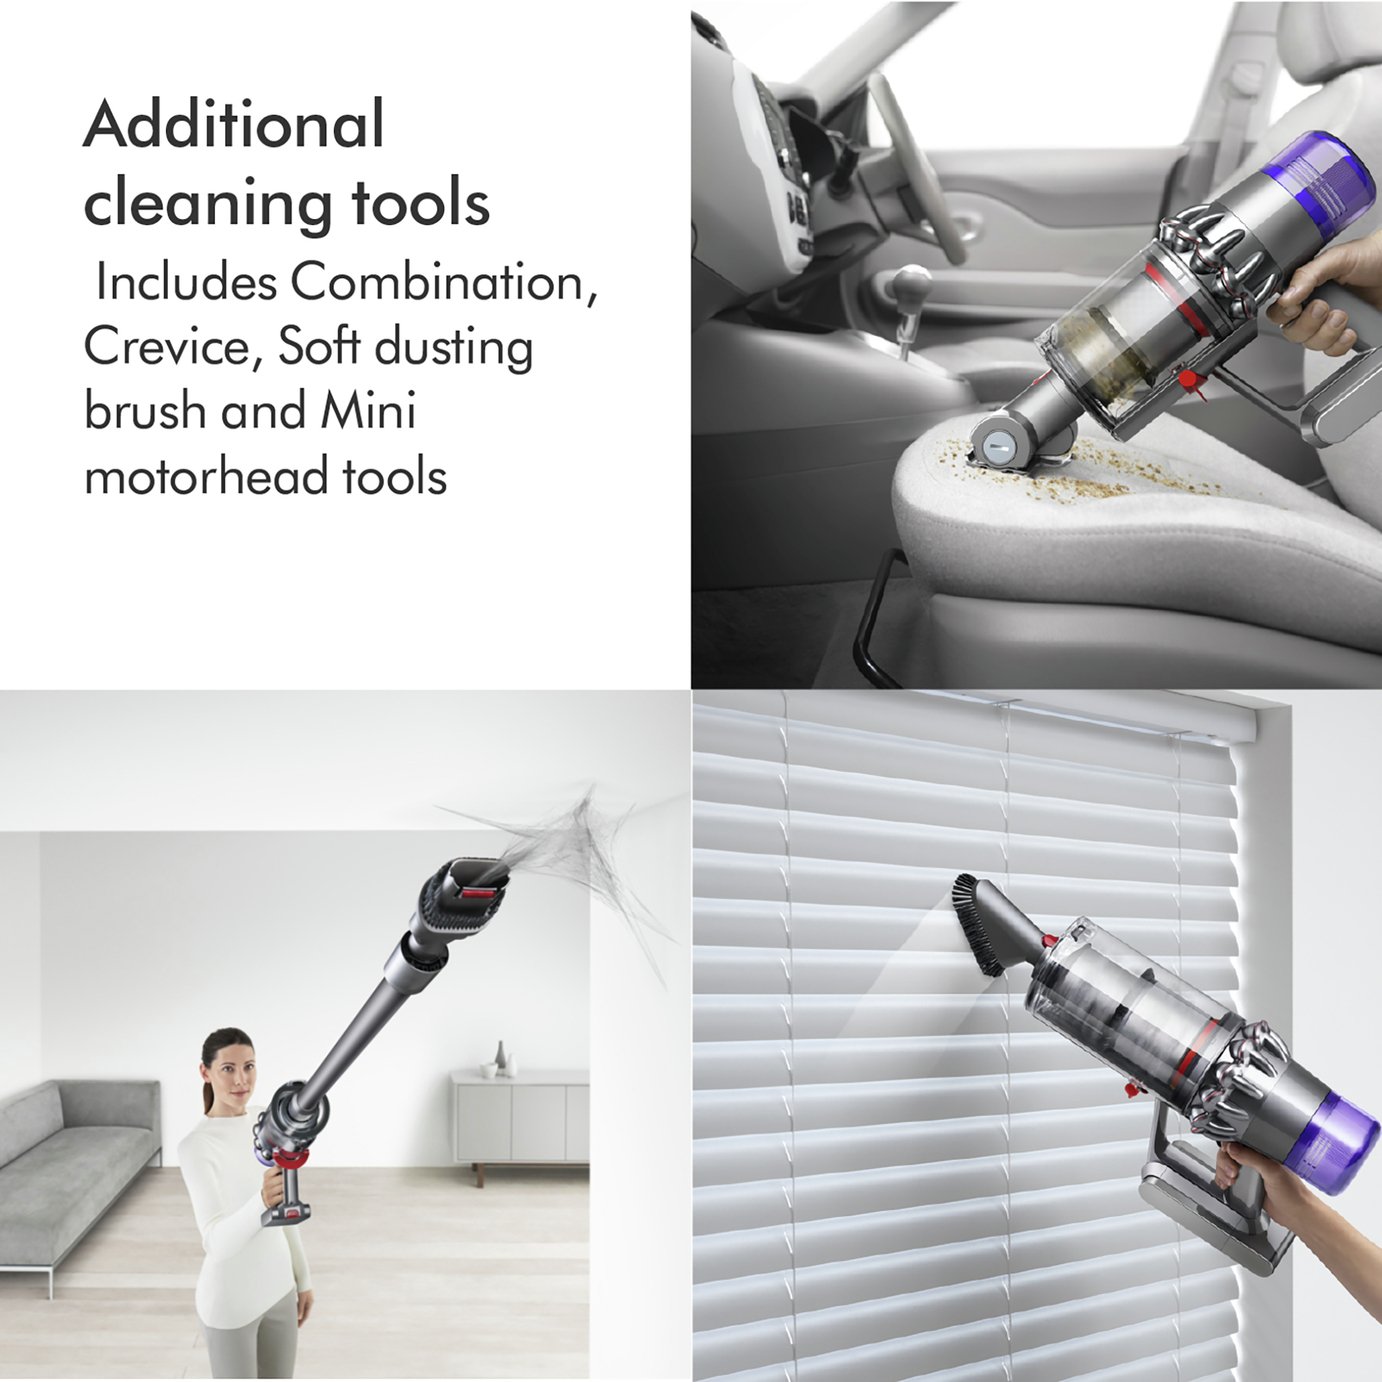 Dyson V11 Torque Drive Vacuum Cleaner Review